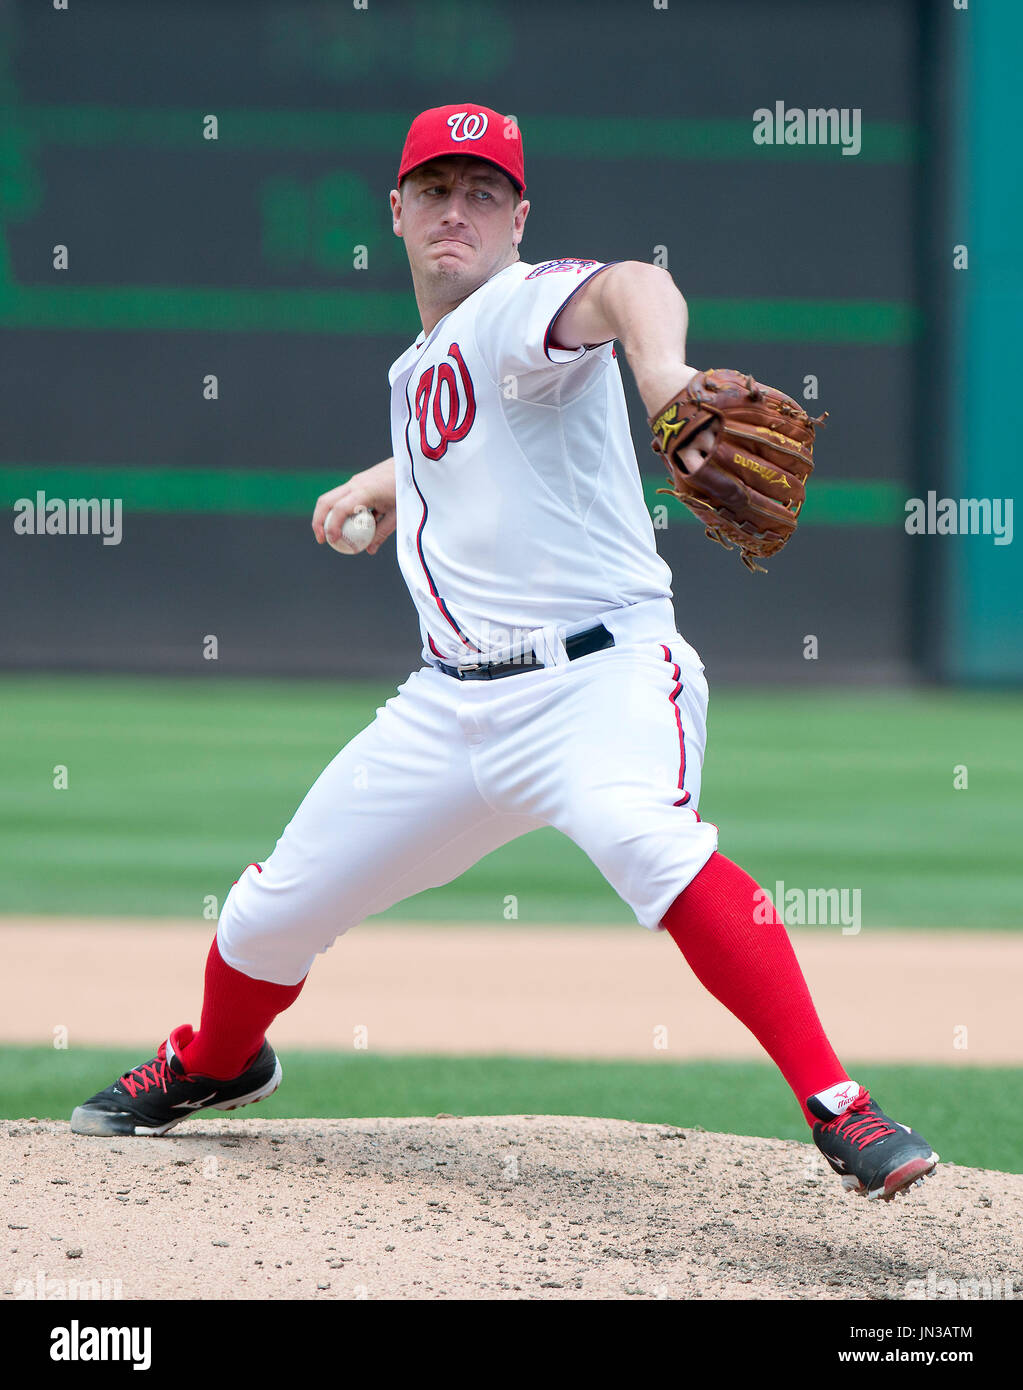 Washington Nationals starting pitcher Jordan Zimmermann (27) works in the seventh inning against the New York Mets at Nationals Park in Washington, D.C. on Thursday, August 7, 2014.  Zimmermann was not involved in the decision as the Nationals won the game 5 - 3 in 13 innings. Credit: Ron Sachs / CNP (RESTRICTION: NO New York or New Jersey Newspapers or newspapers within a 75 mile radius of New York City) Stock Photo